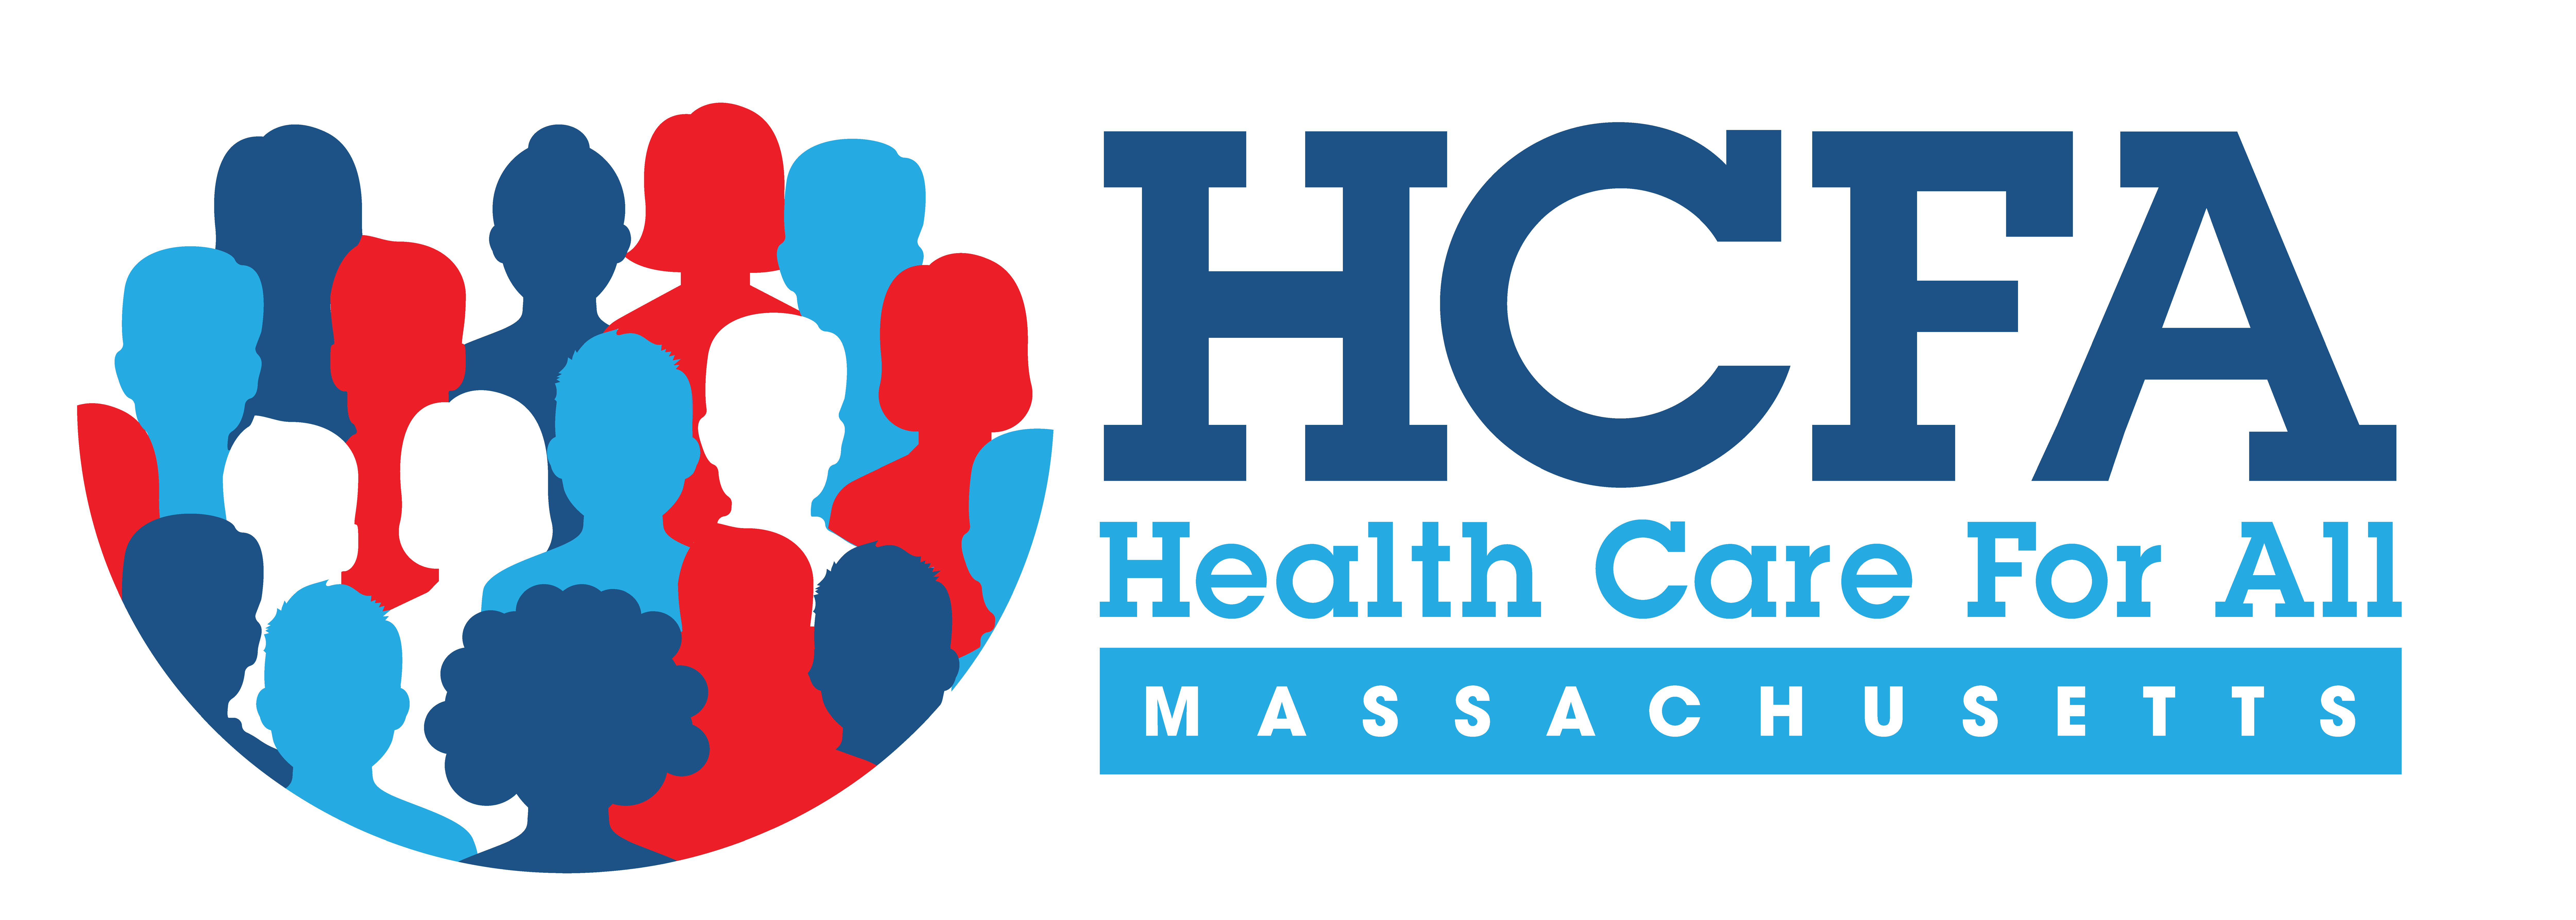 PRESS STATEMENT: Health Care For All Congratulates New Acting Health and Human Services Secretary Mary Beckman